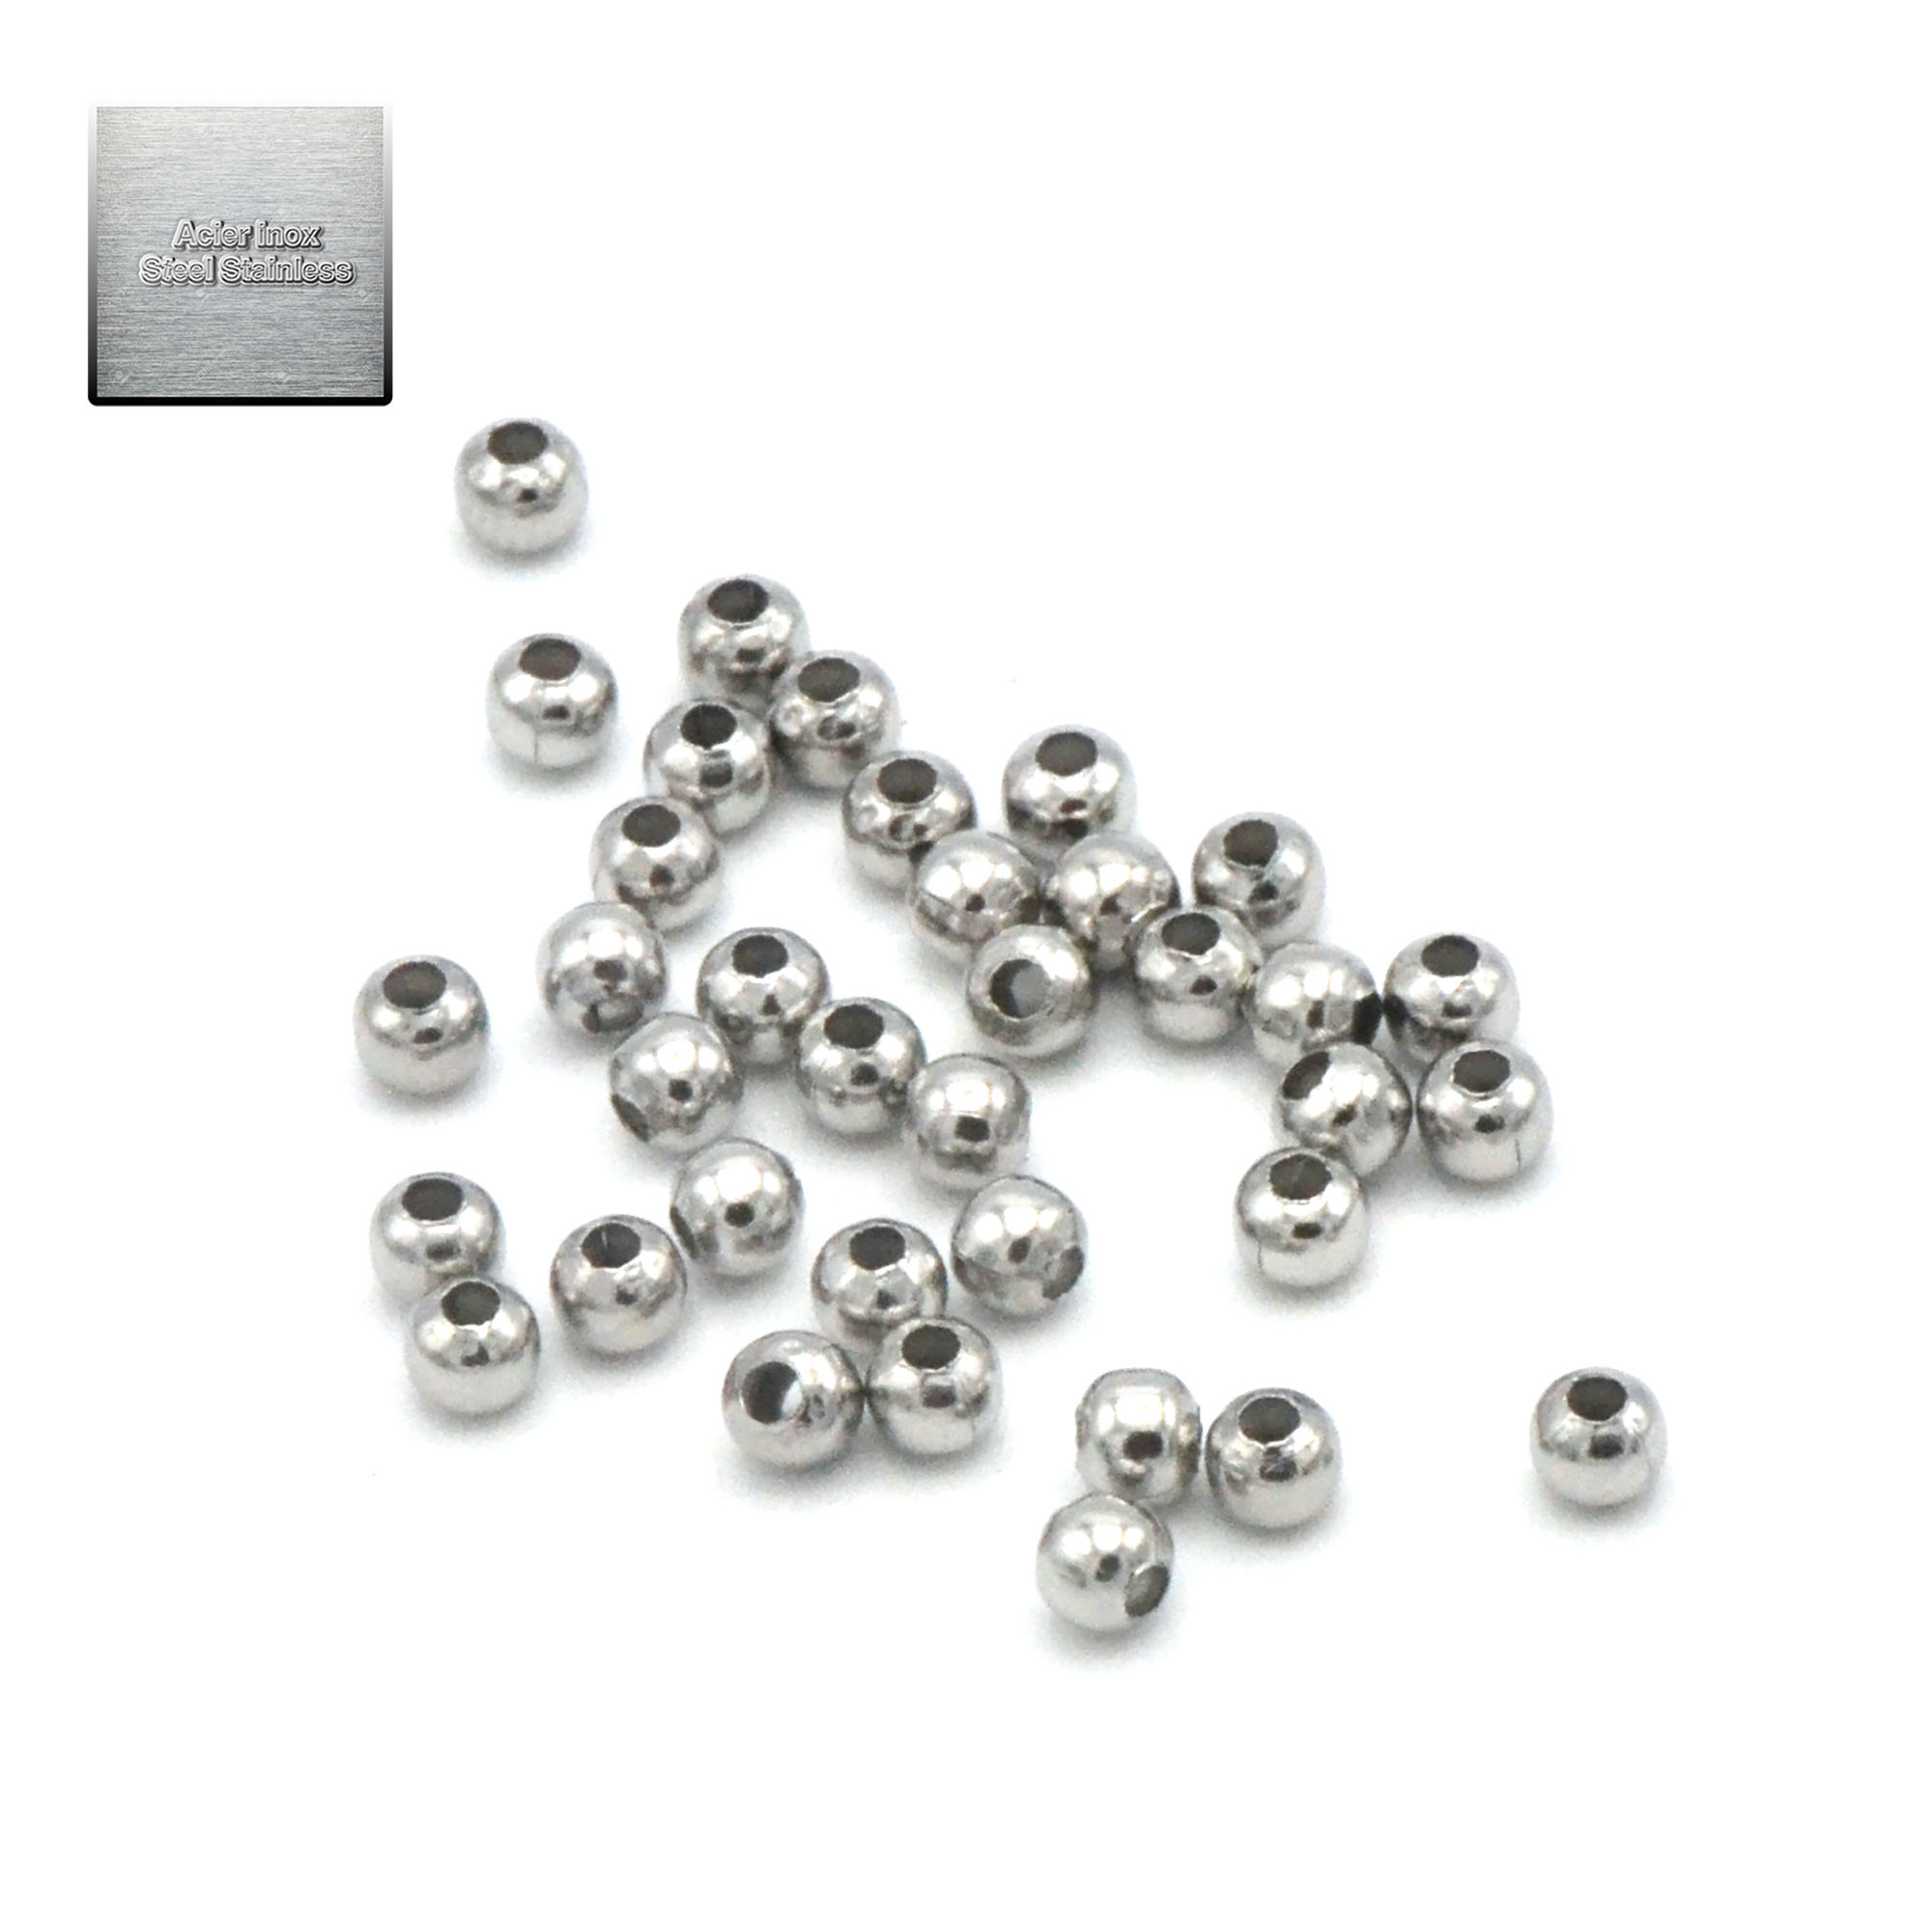 004 perle rondes 3 mm